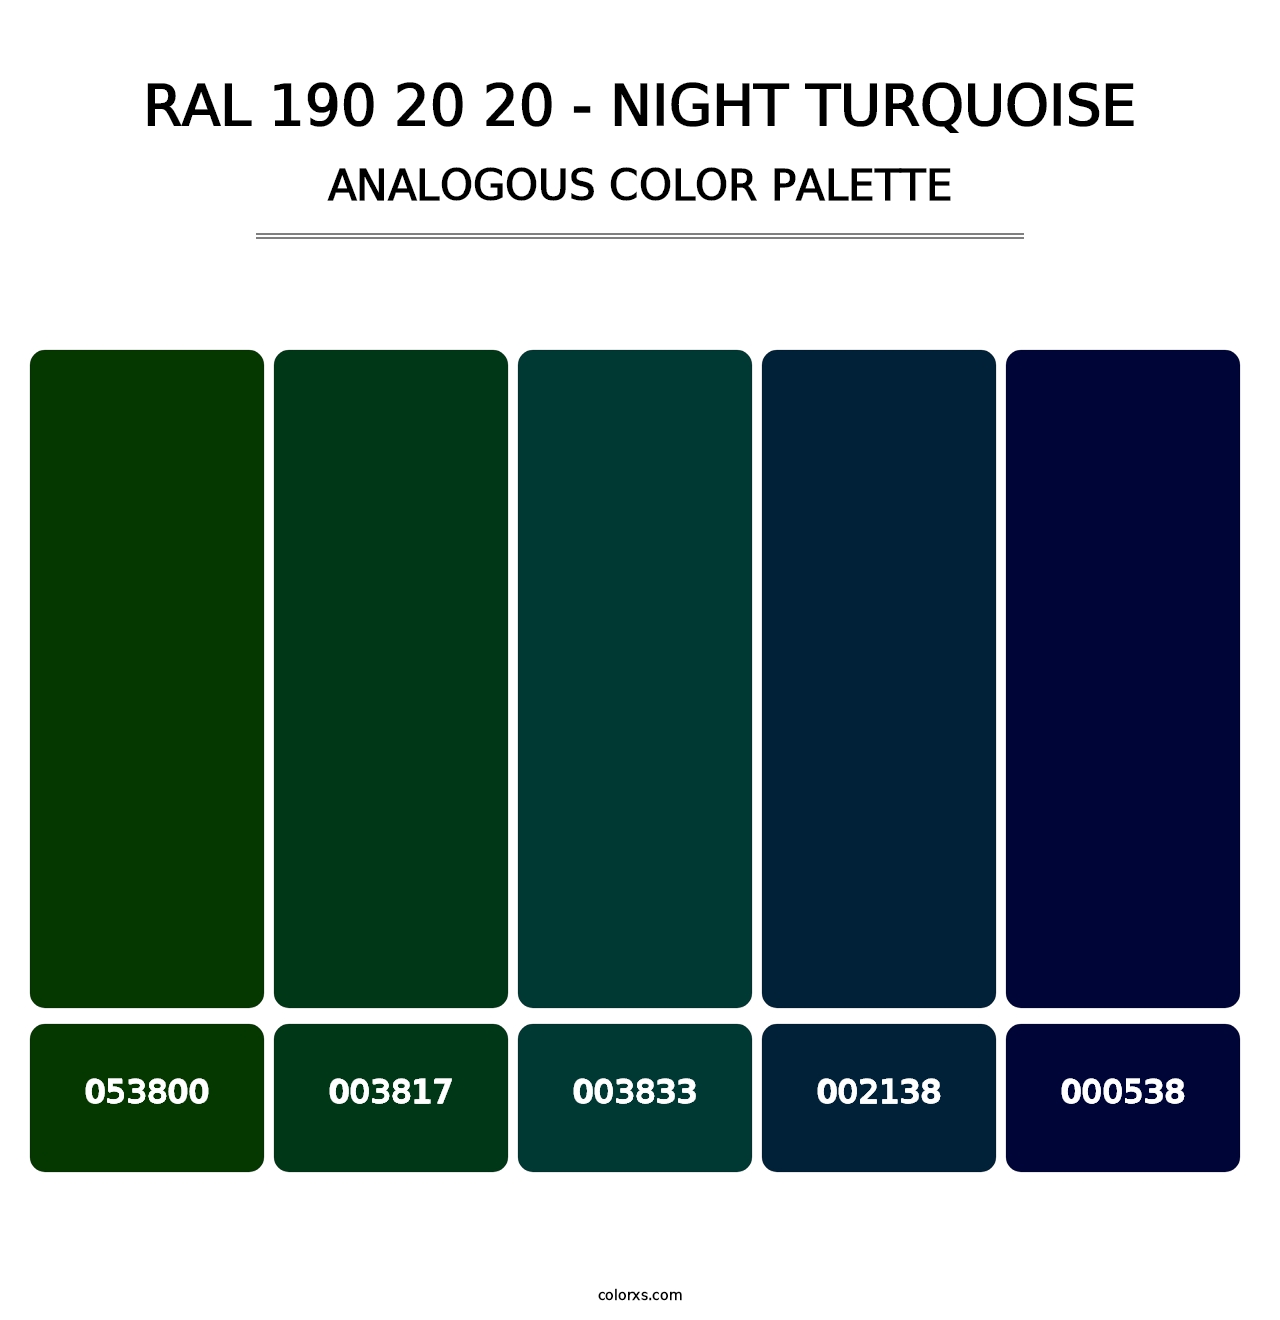 RAL 190 20 20 - Night Turquoise - Analogous Color Palette